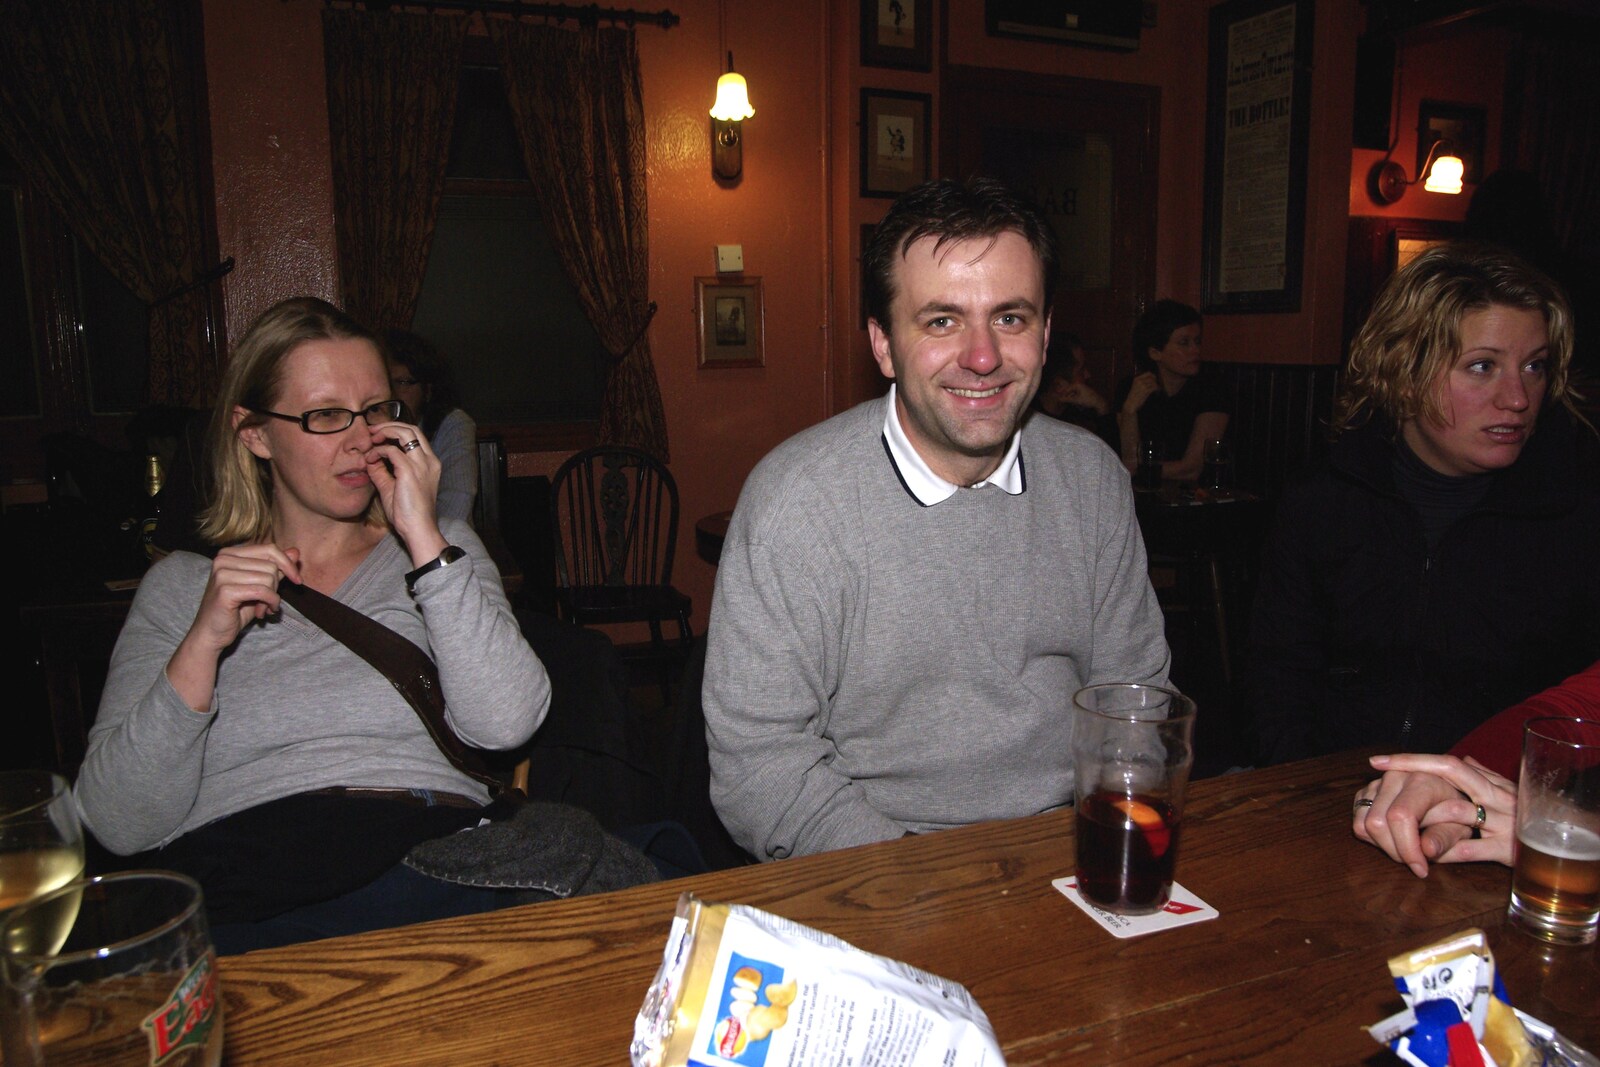 Nadine picks her nose; Liviu smiles from Beer and Kebabs: Leaving "The Lab", Mill Road, Cambridge - 12th January 2007